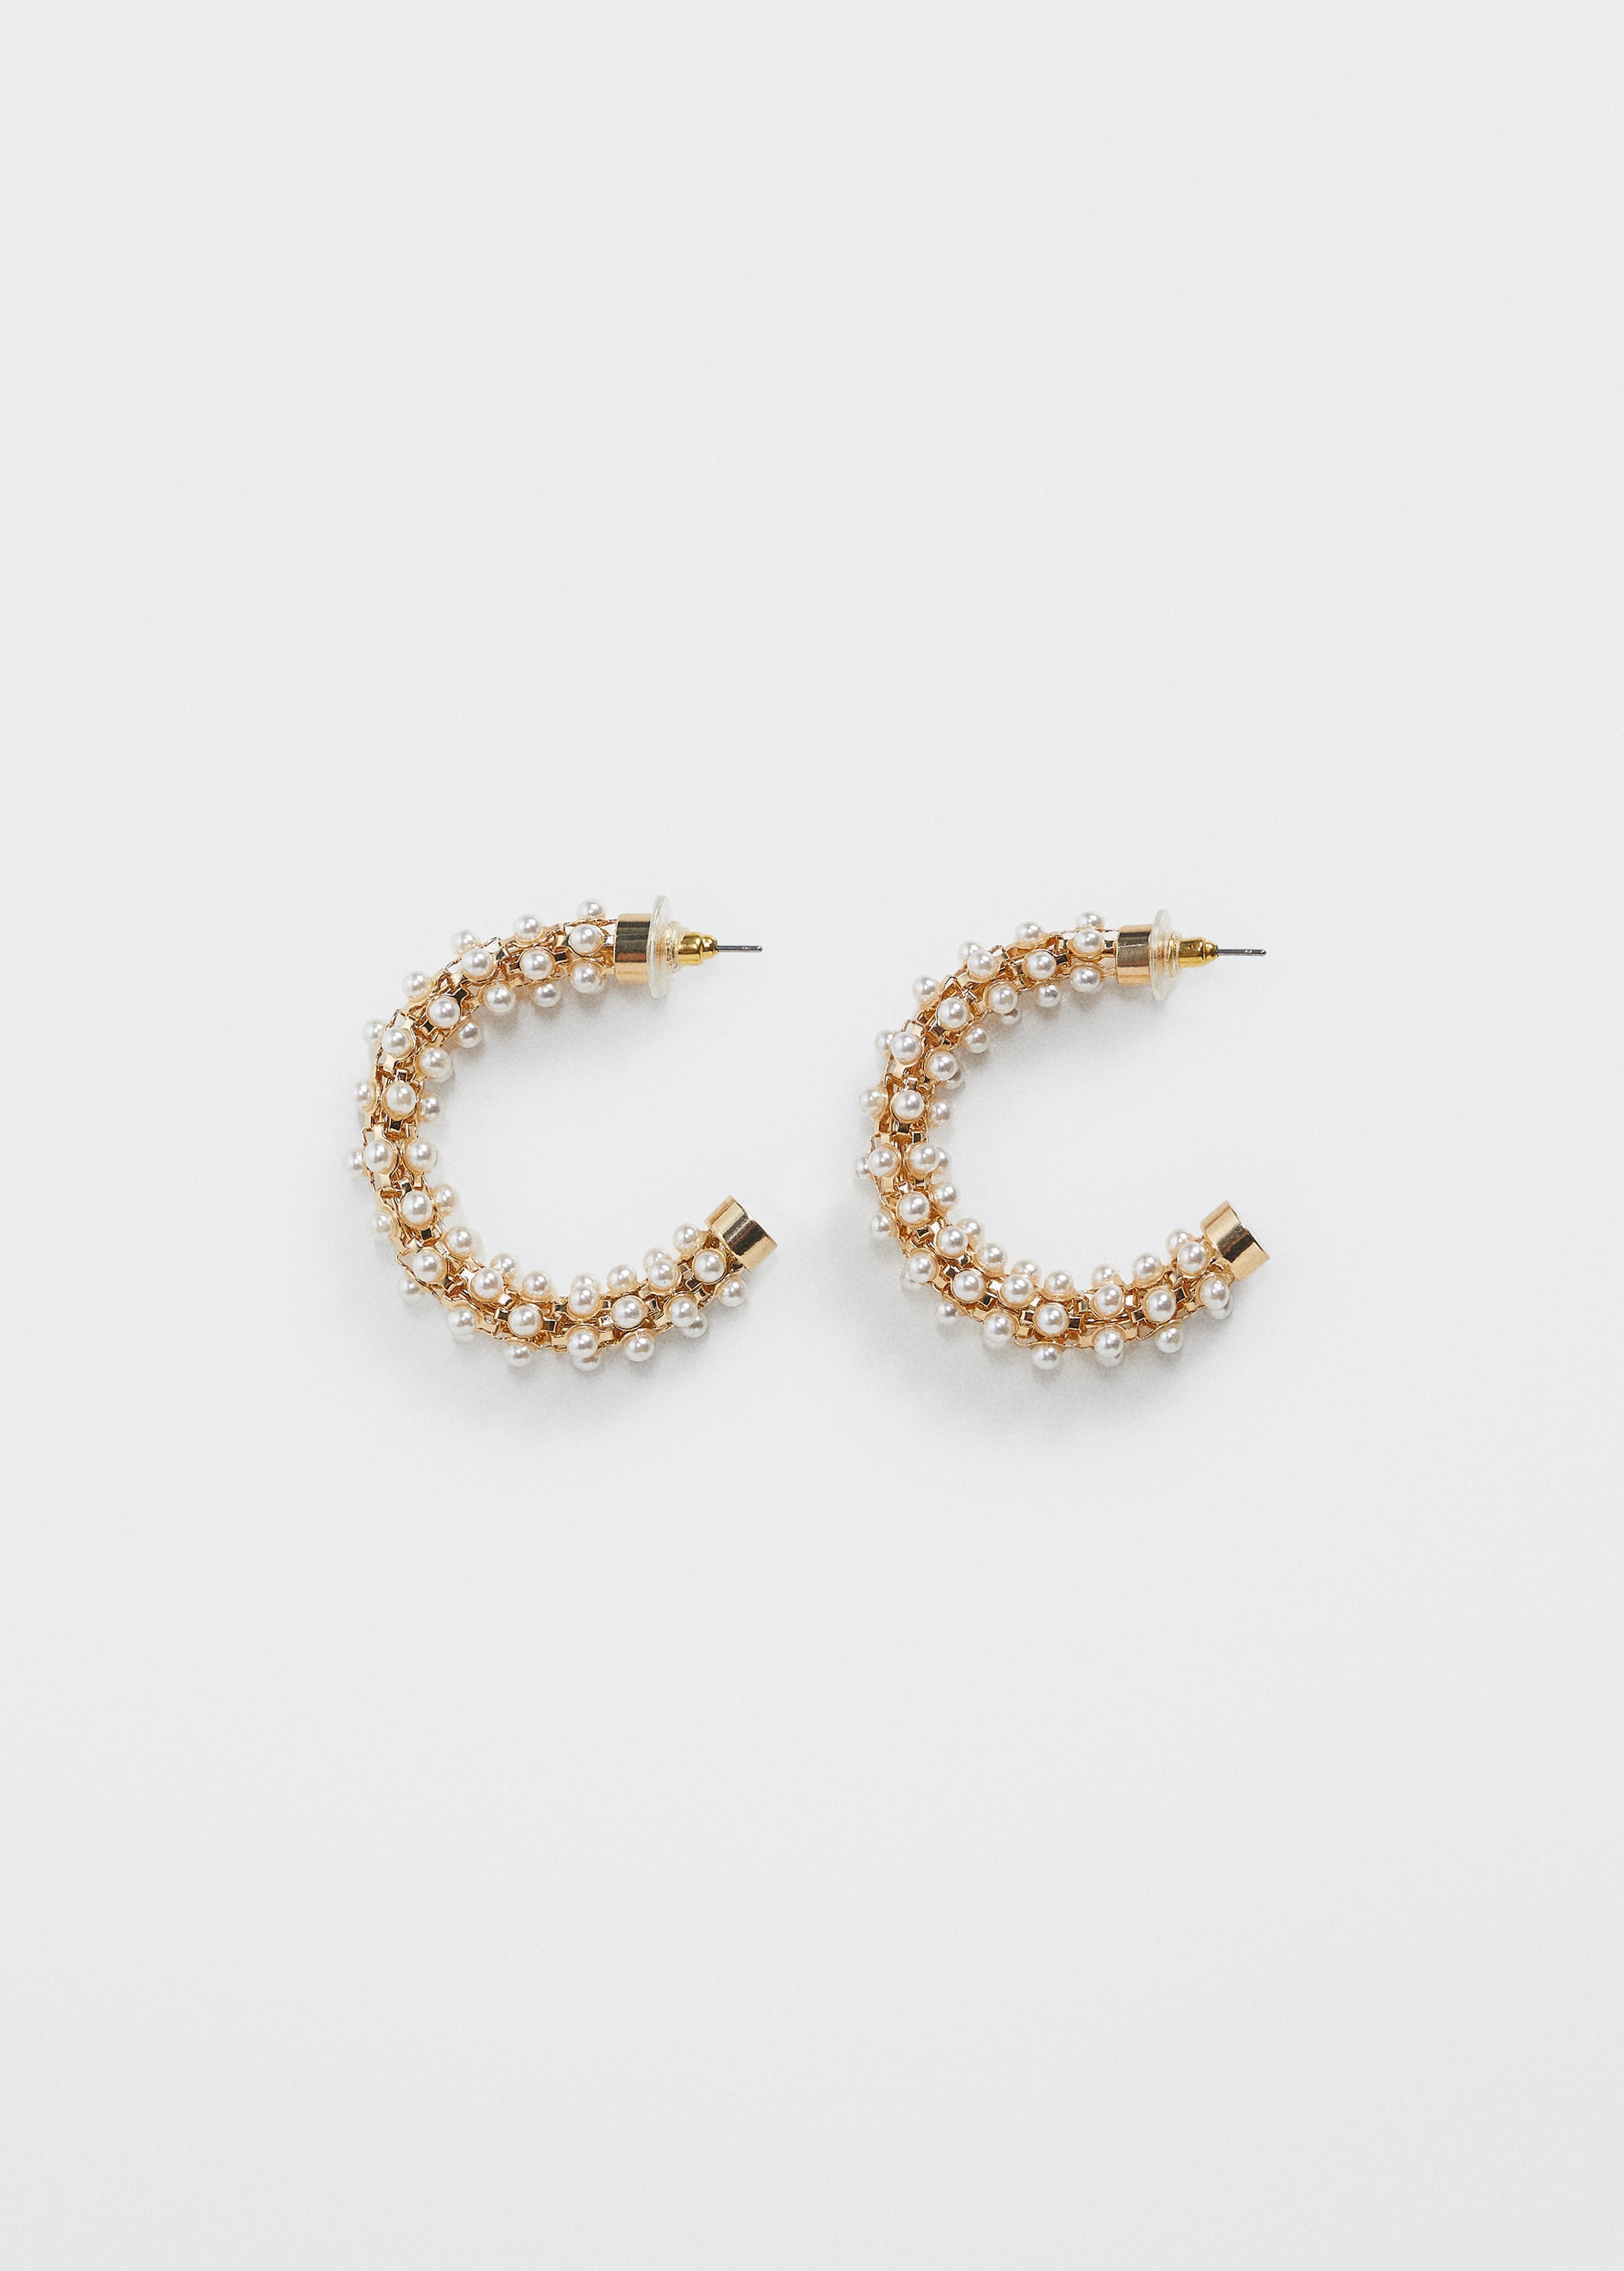 Pearl hoops earrings - Article without model